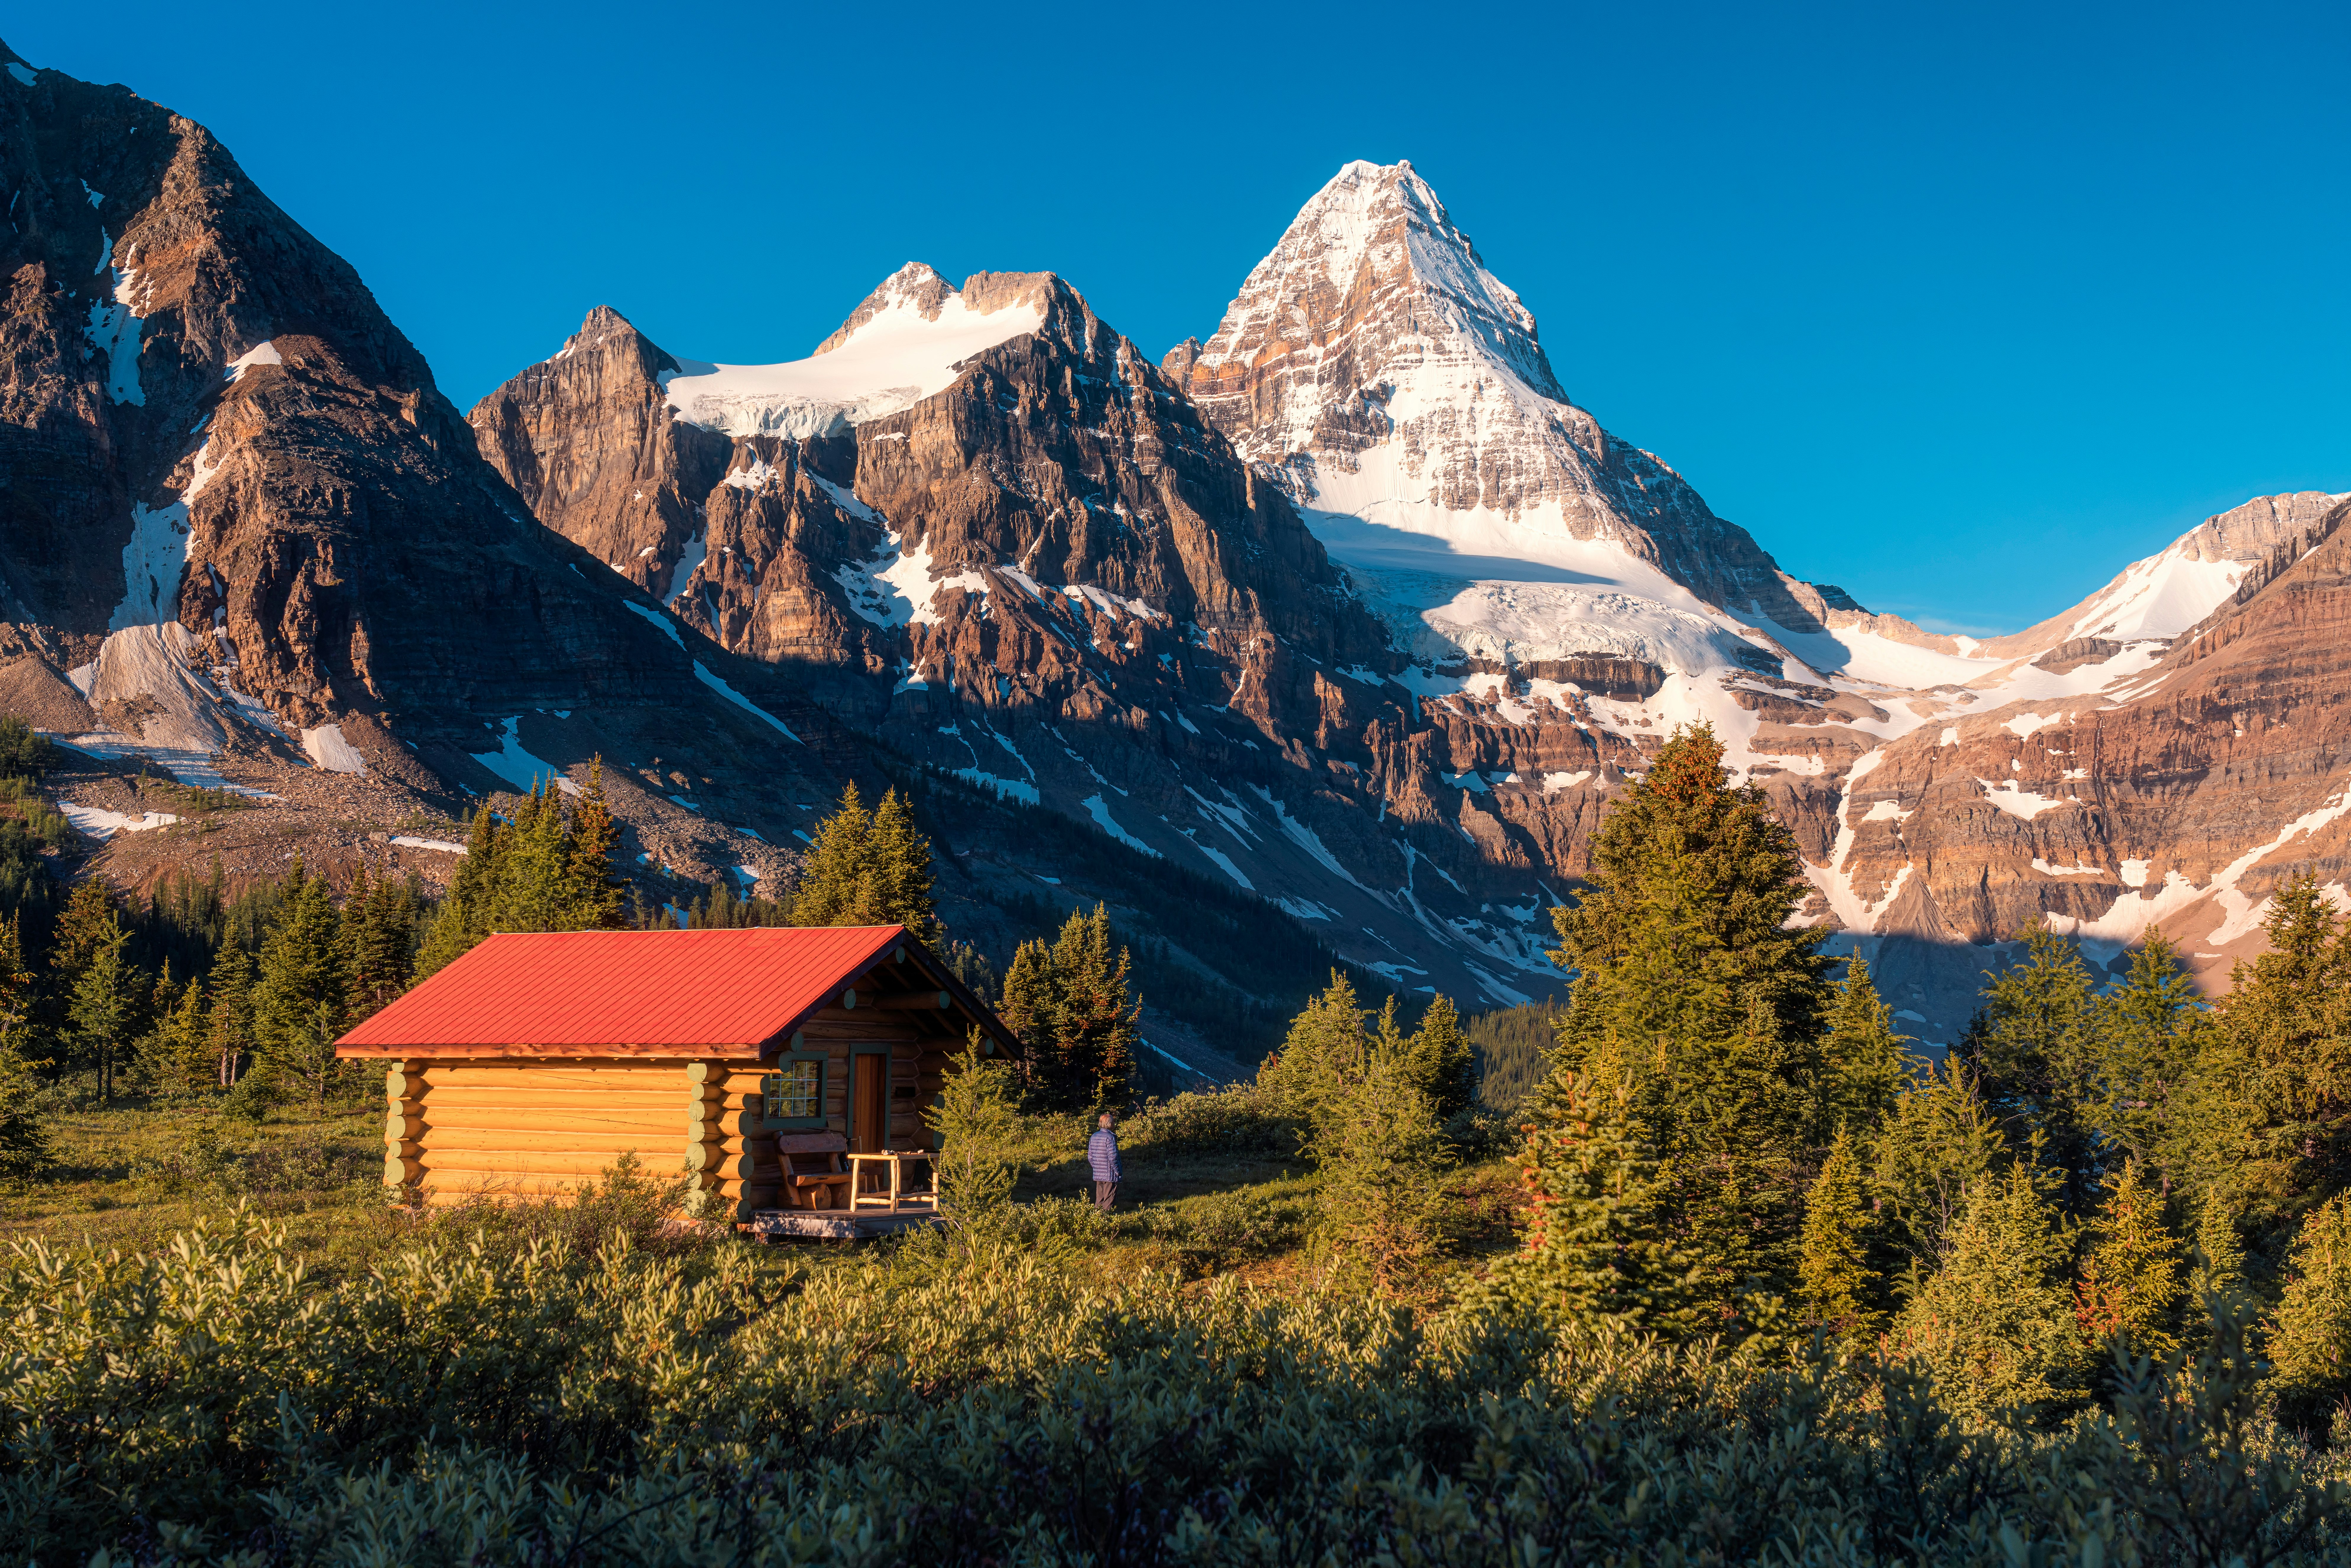 Hiker standing next to a wood cabin and looking at Mt. Assiniboine